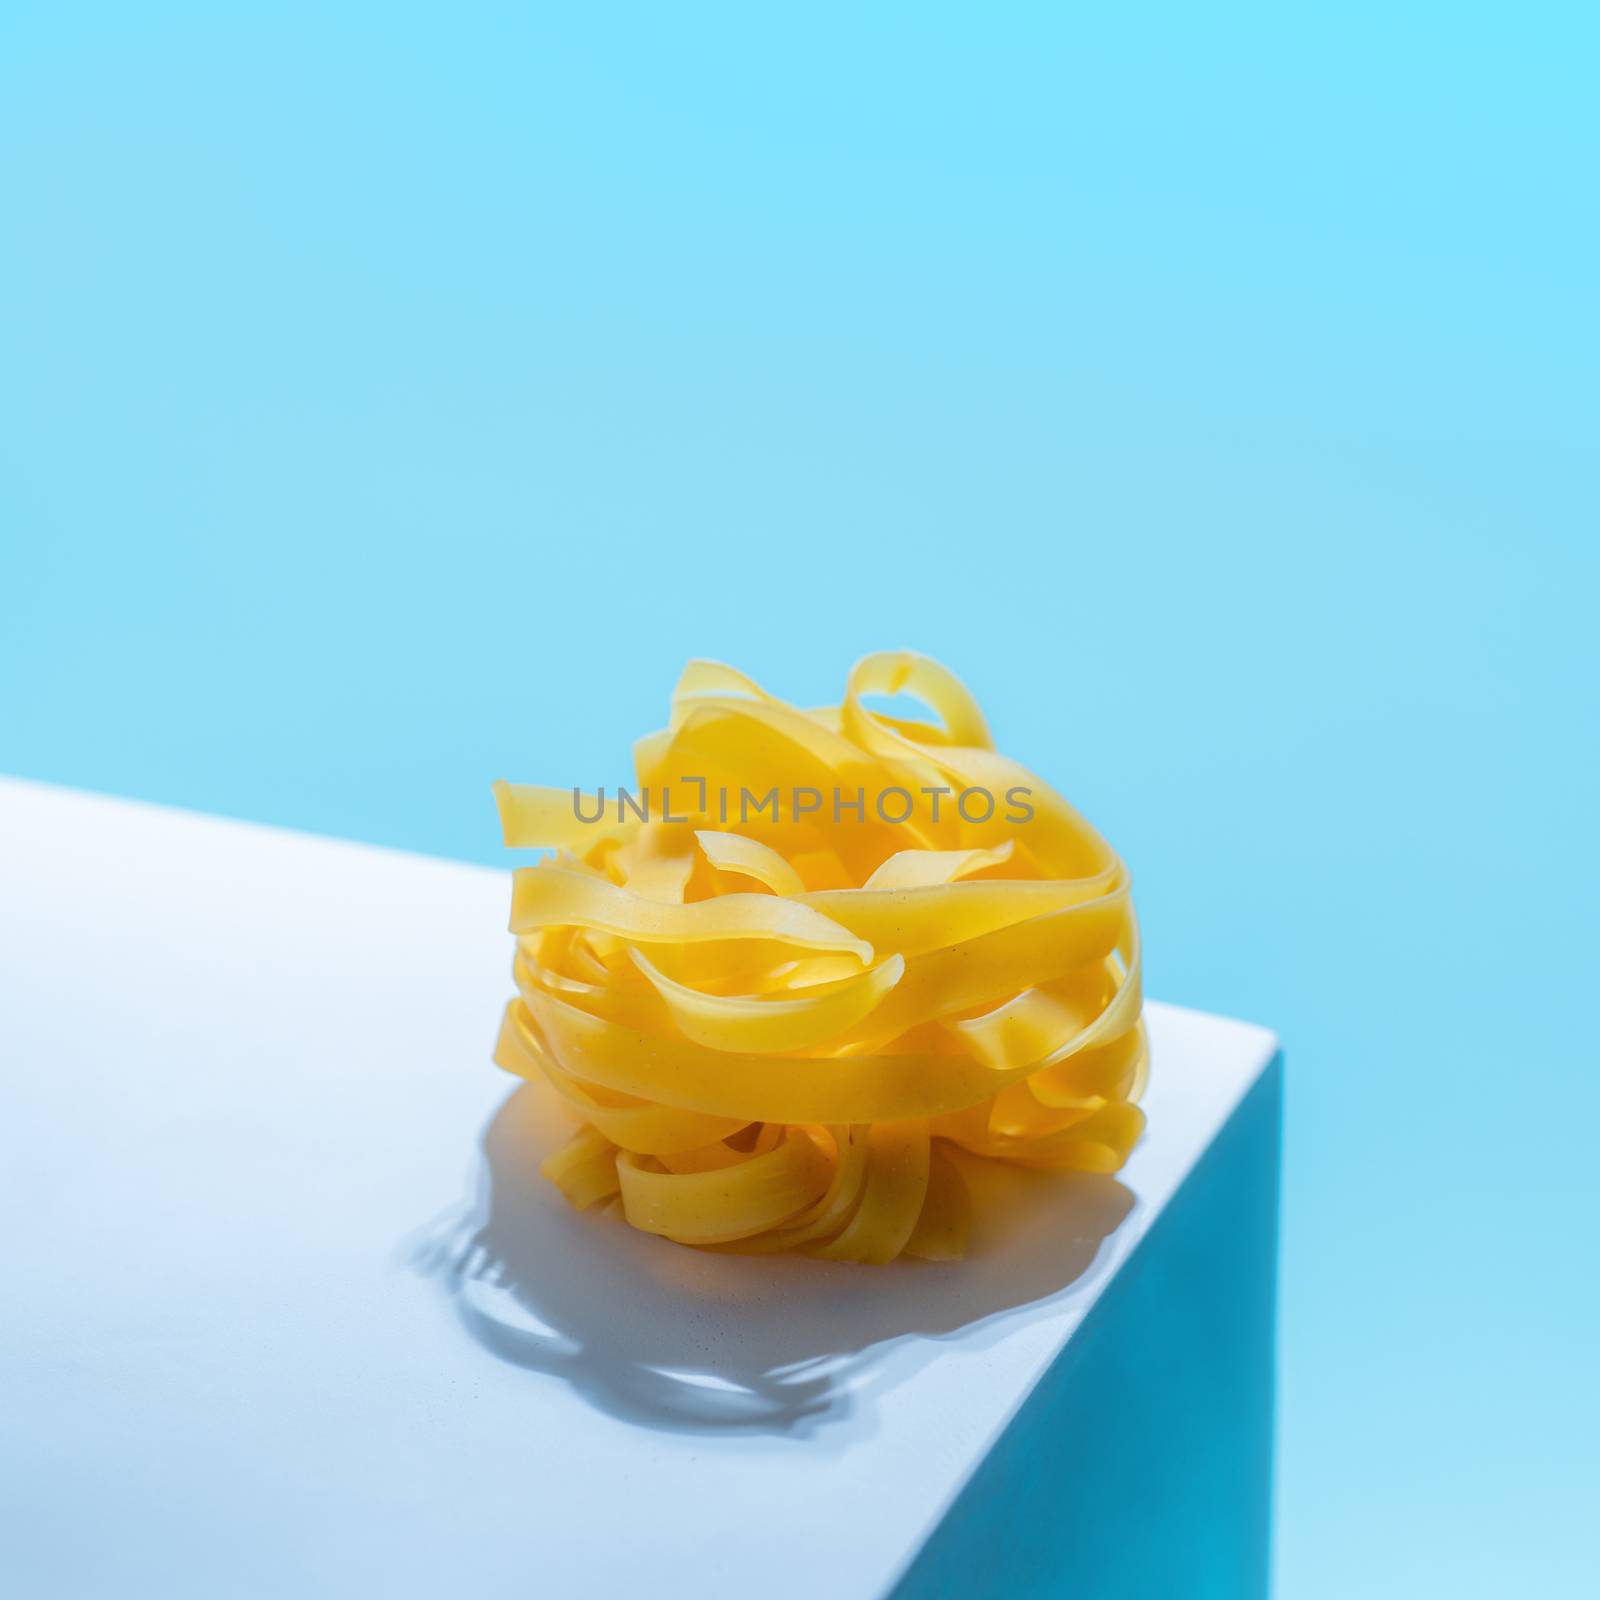 Pasta art with tagliatelle on blue background by fascinadora